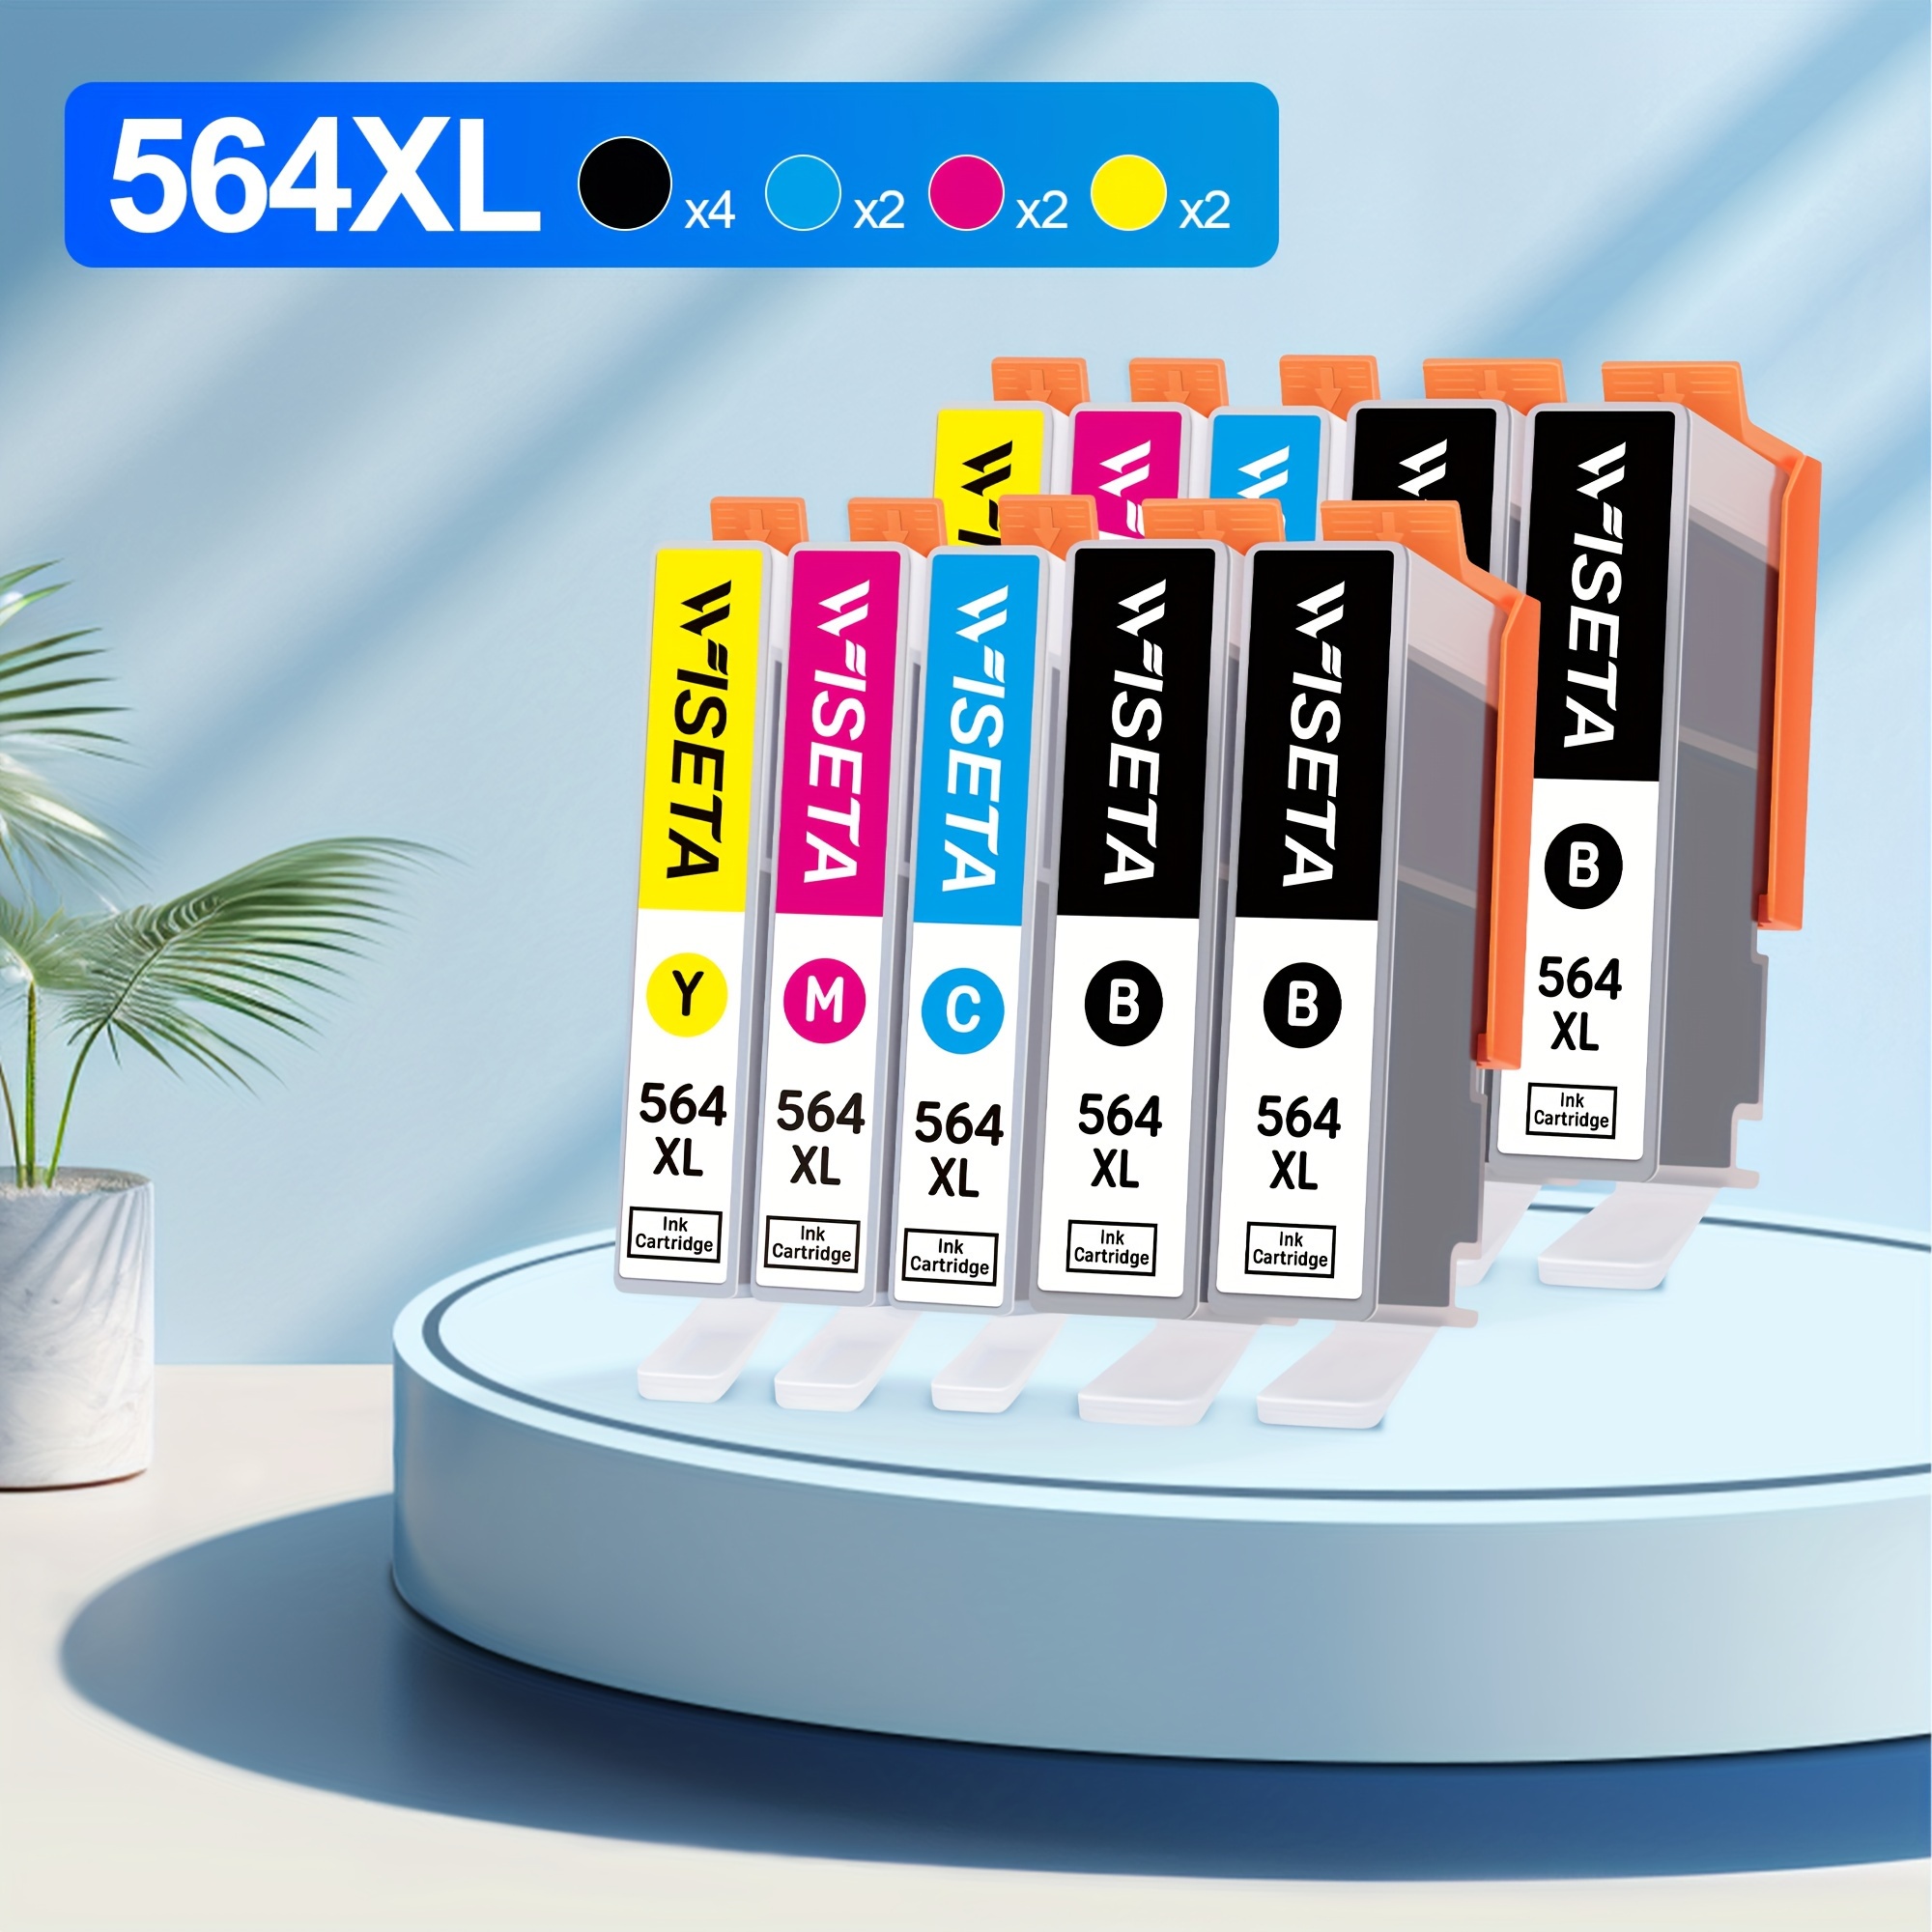 

10 Pack 564xl Compatible Ink Cartridge Replacement For 564xl 564 Xl Compatible With Deskjet 3520 3522 Officejet 4620 Photosmart 5520 6510 6520 7520 7525 Printer (black Cyan Magenta Yellow)